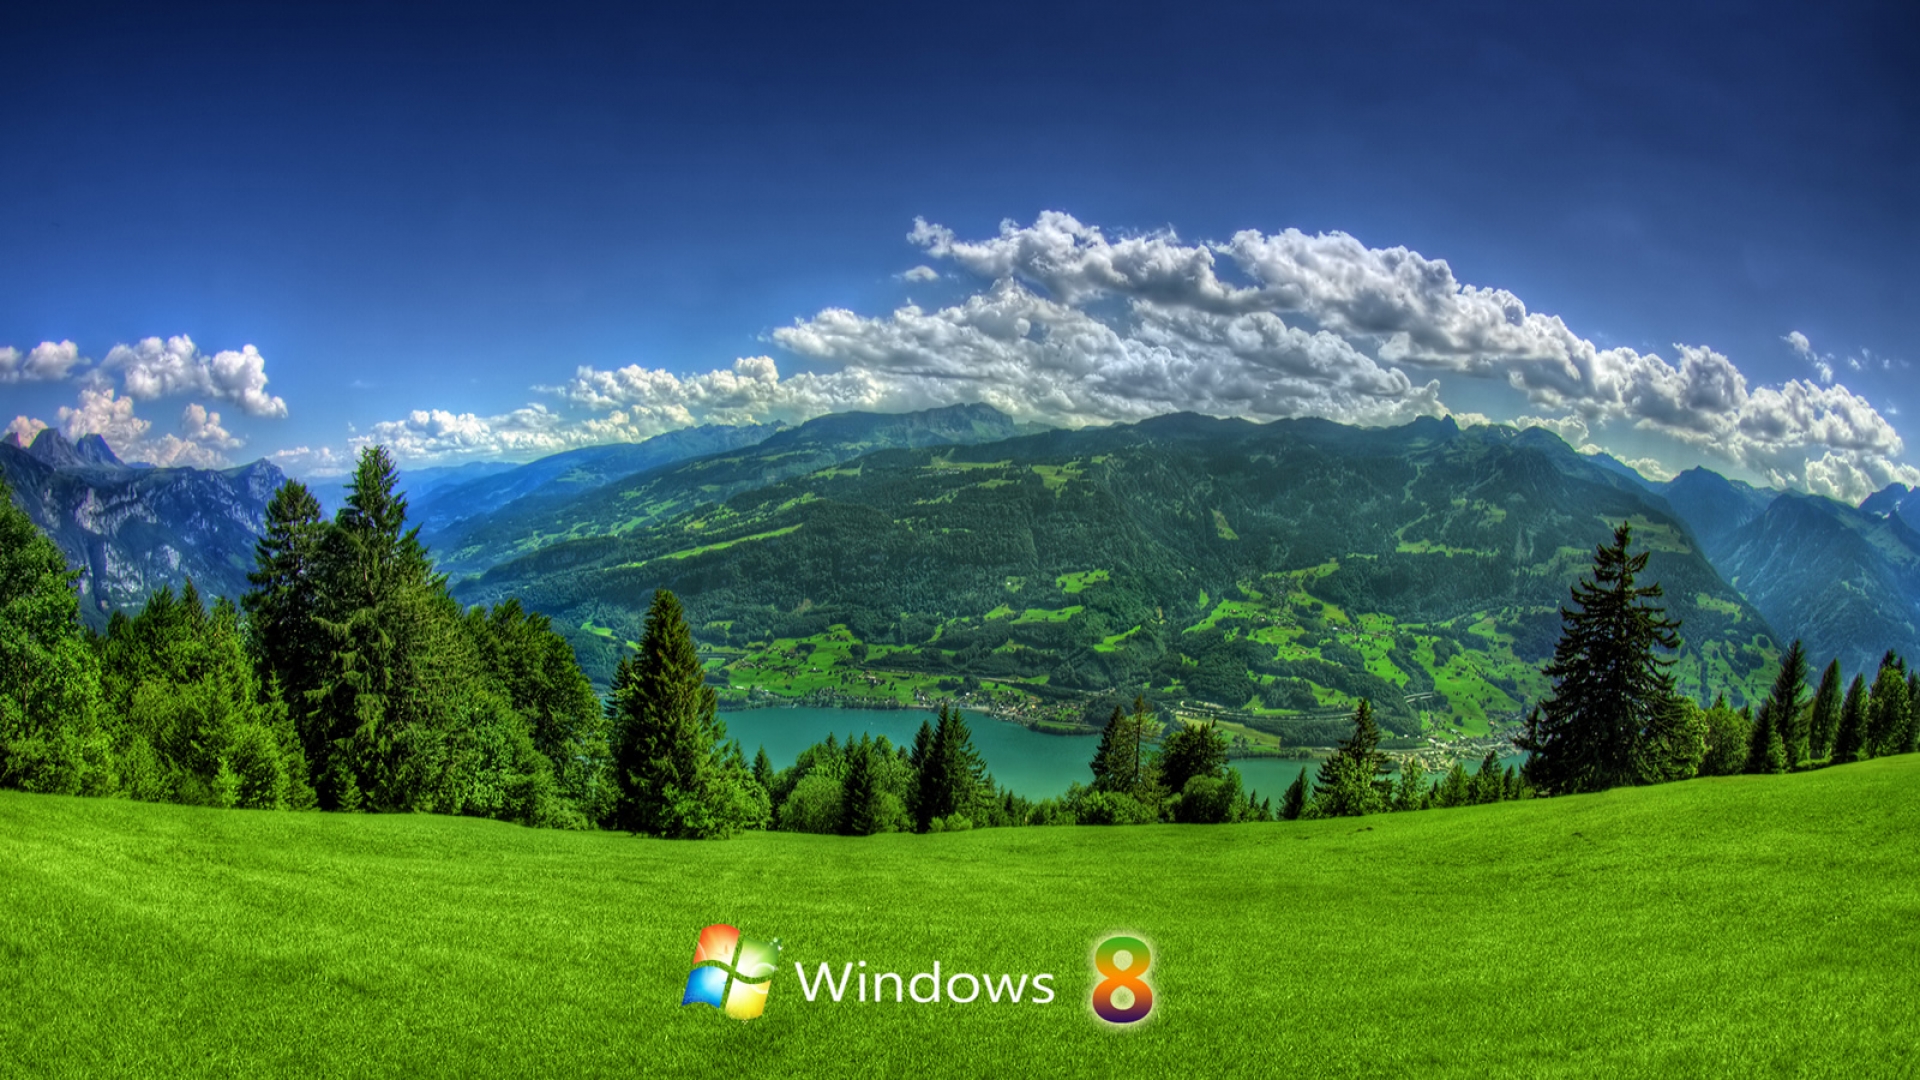 166 Windows 8 HD Wallpapers Backgrounds - Wallpaper Abyss